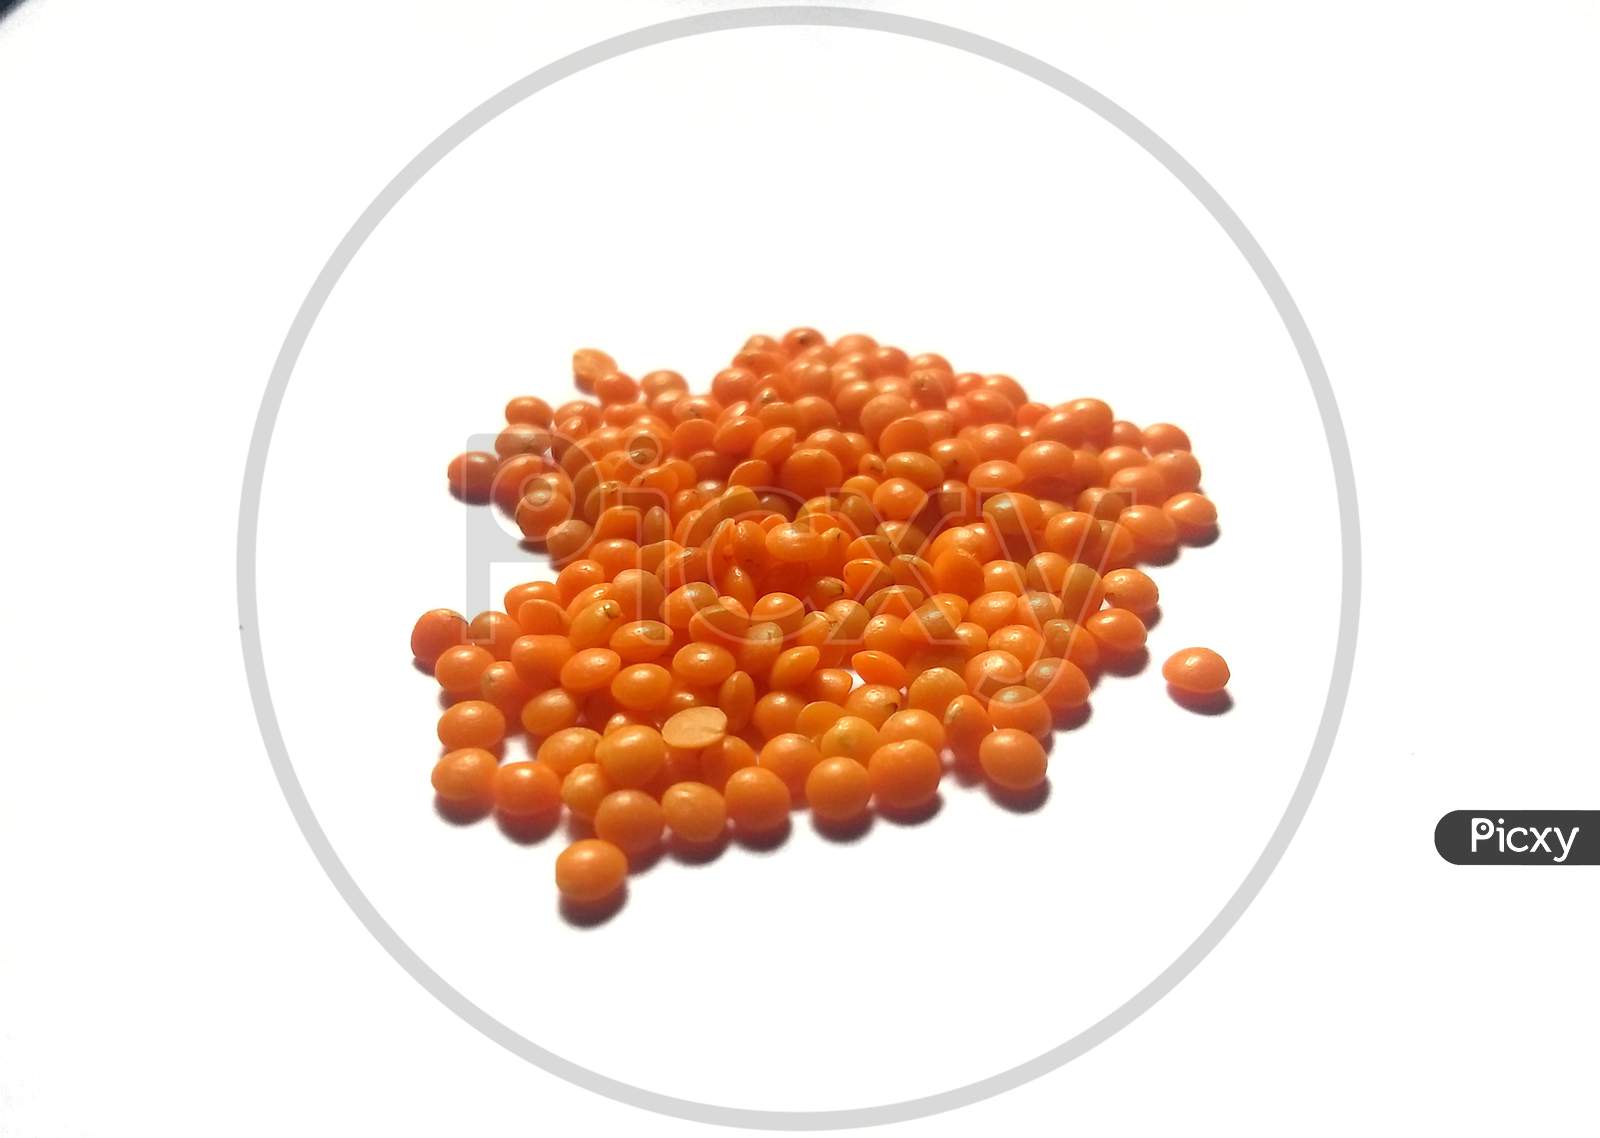 Red lentils or Masoor dal in white background